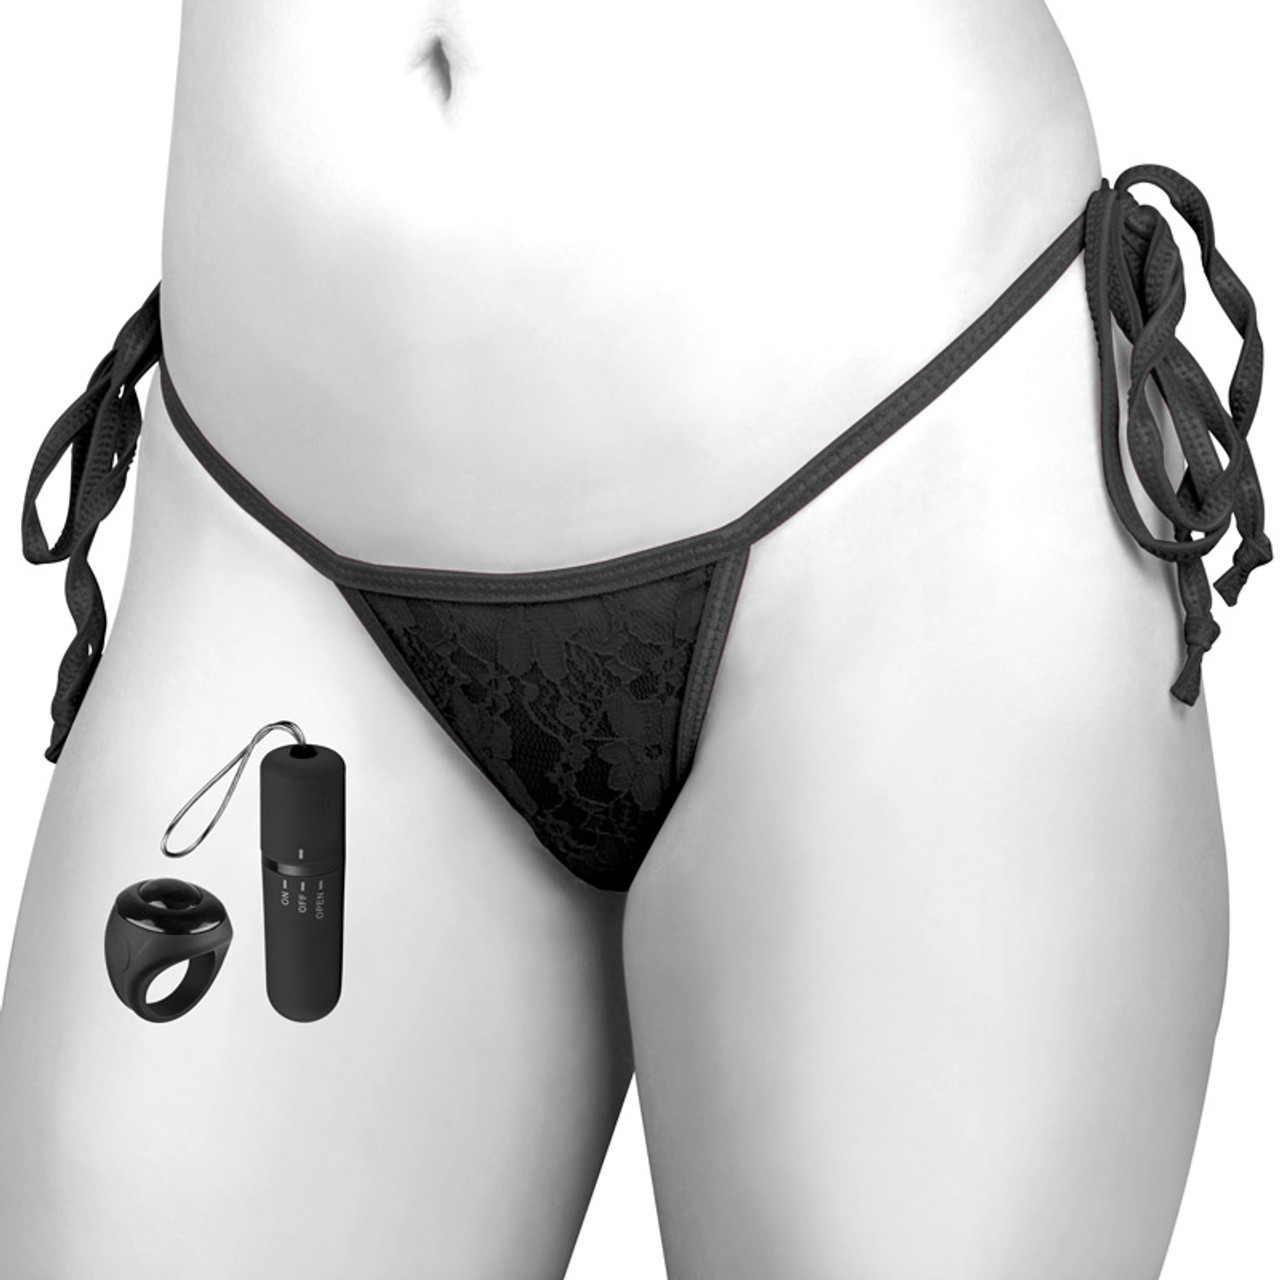 Screaming O 4t - Vibrating Panty Set With Remote Control Ring - Black 